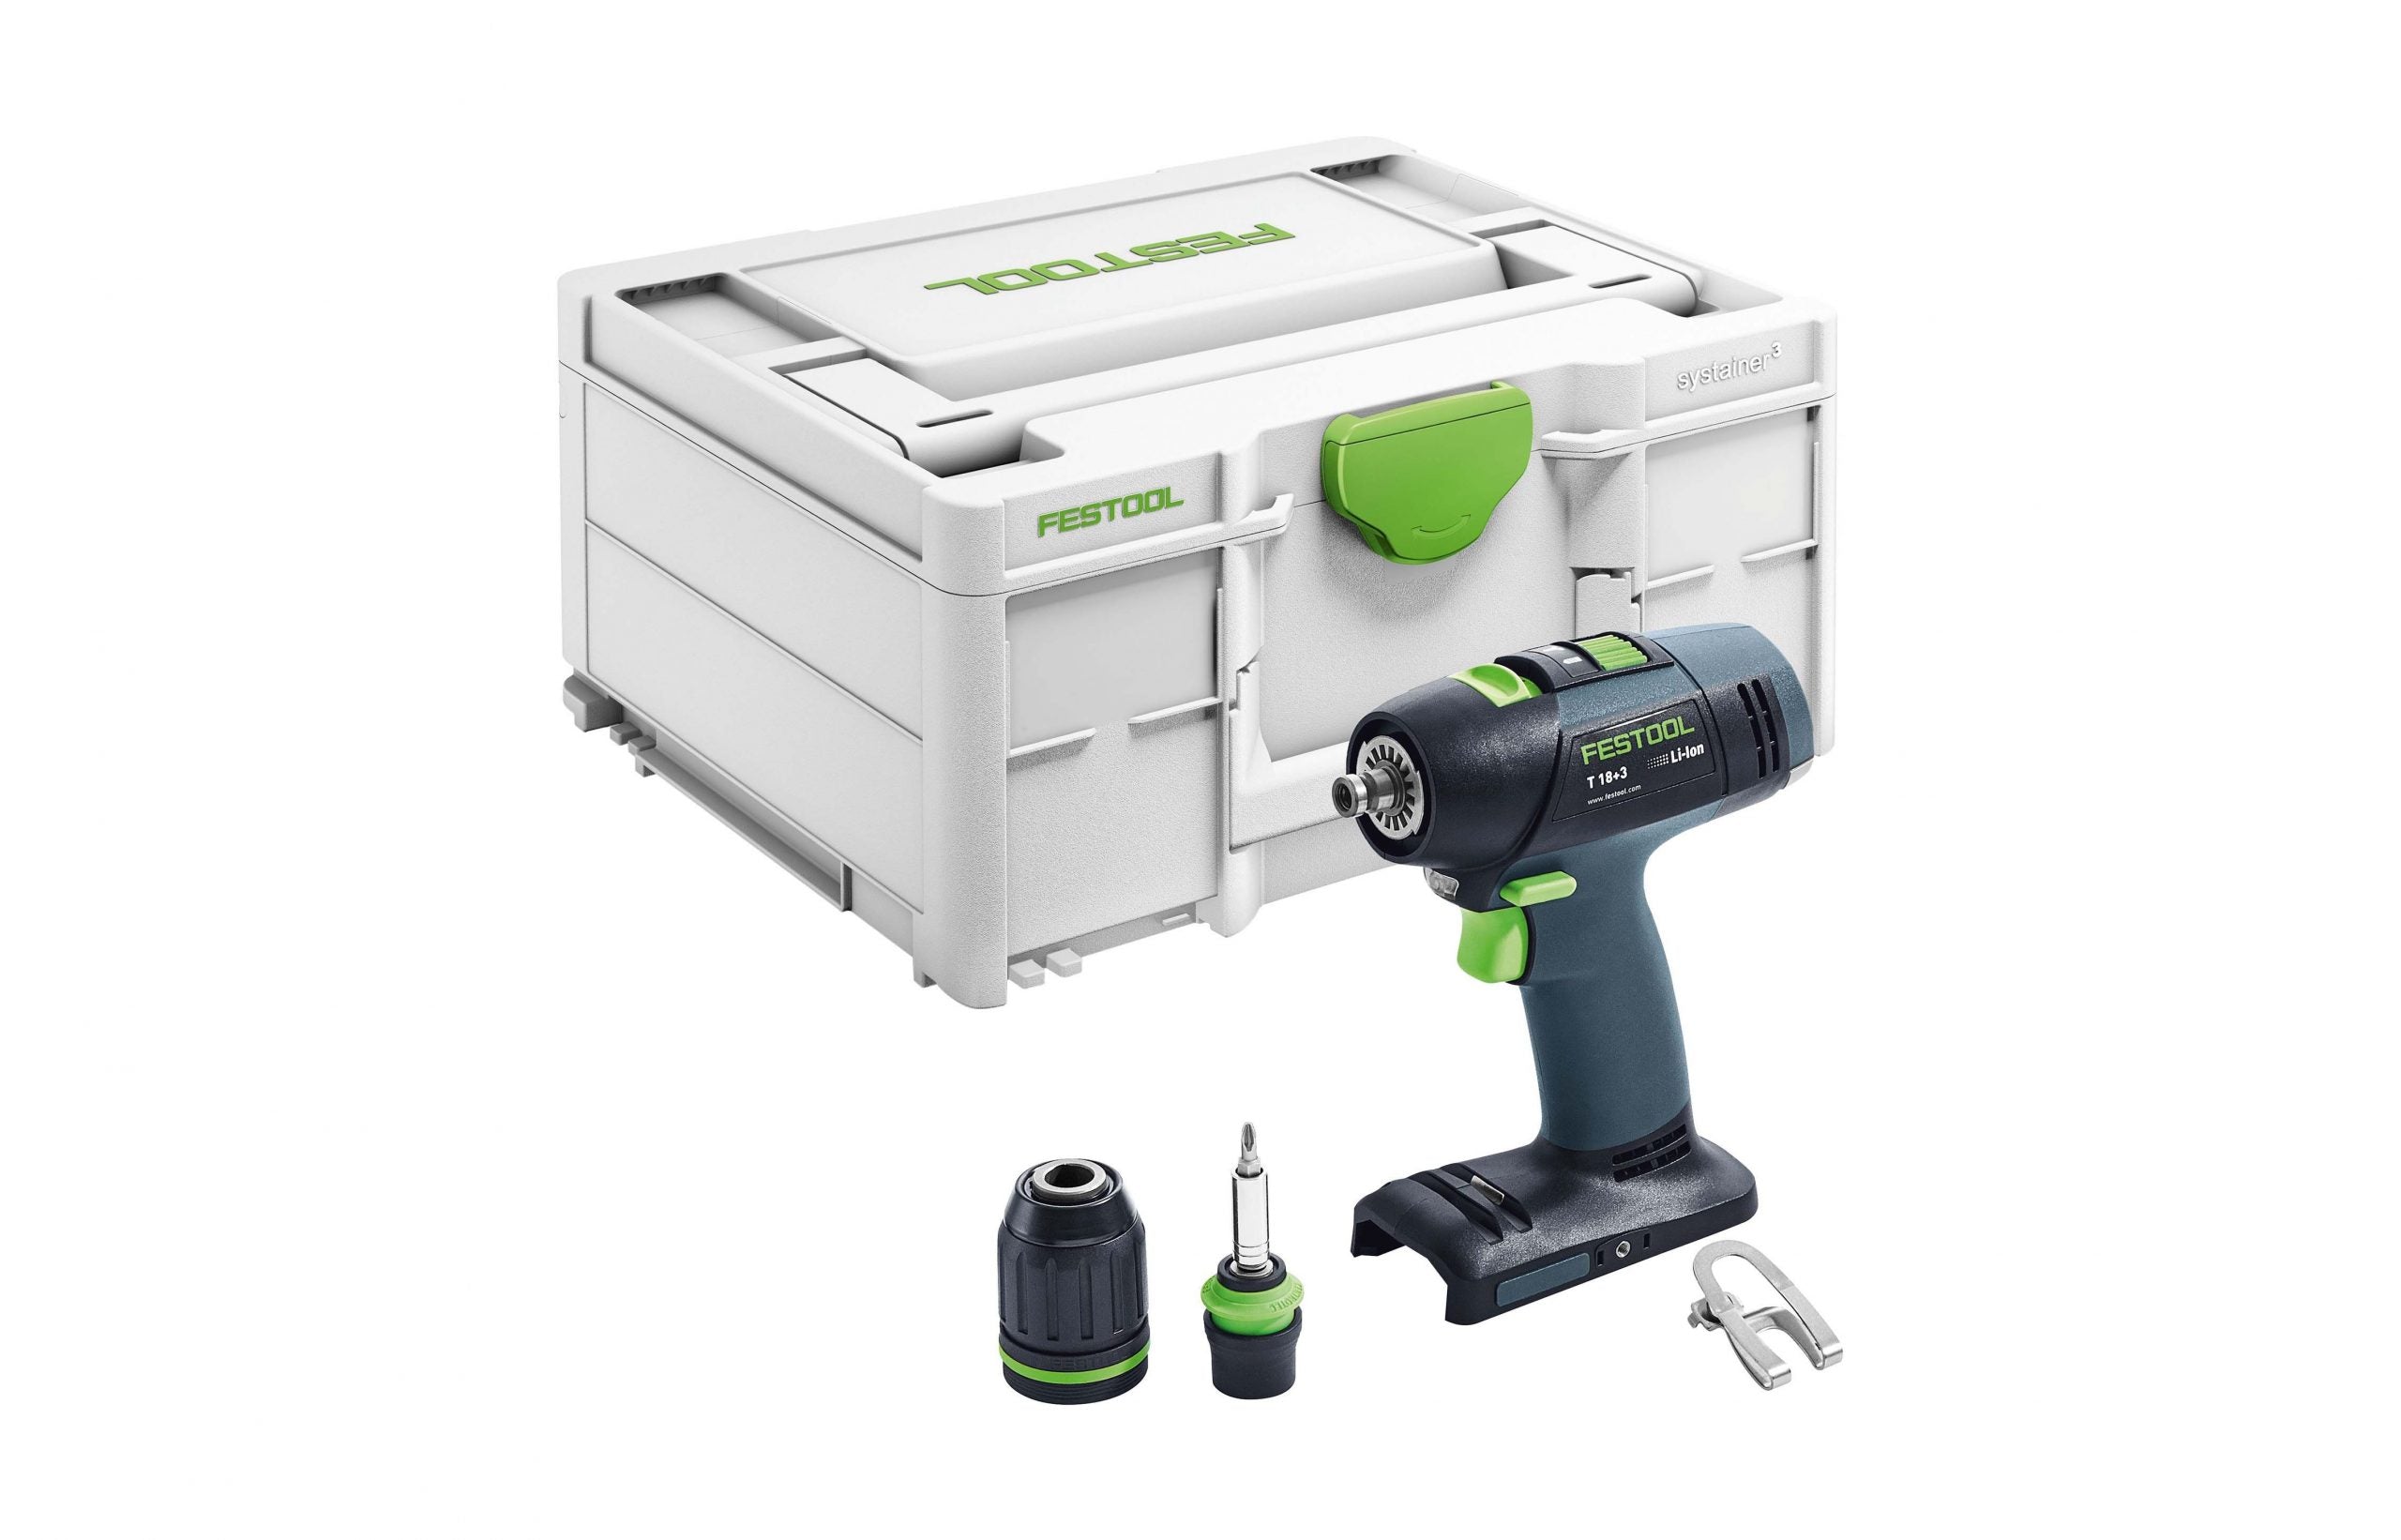 18V T Cordless 2 Speed Drill Basic in Systainer 576448 by Festool